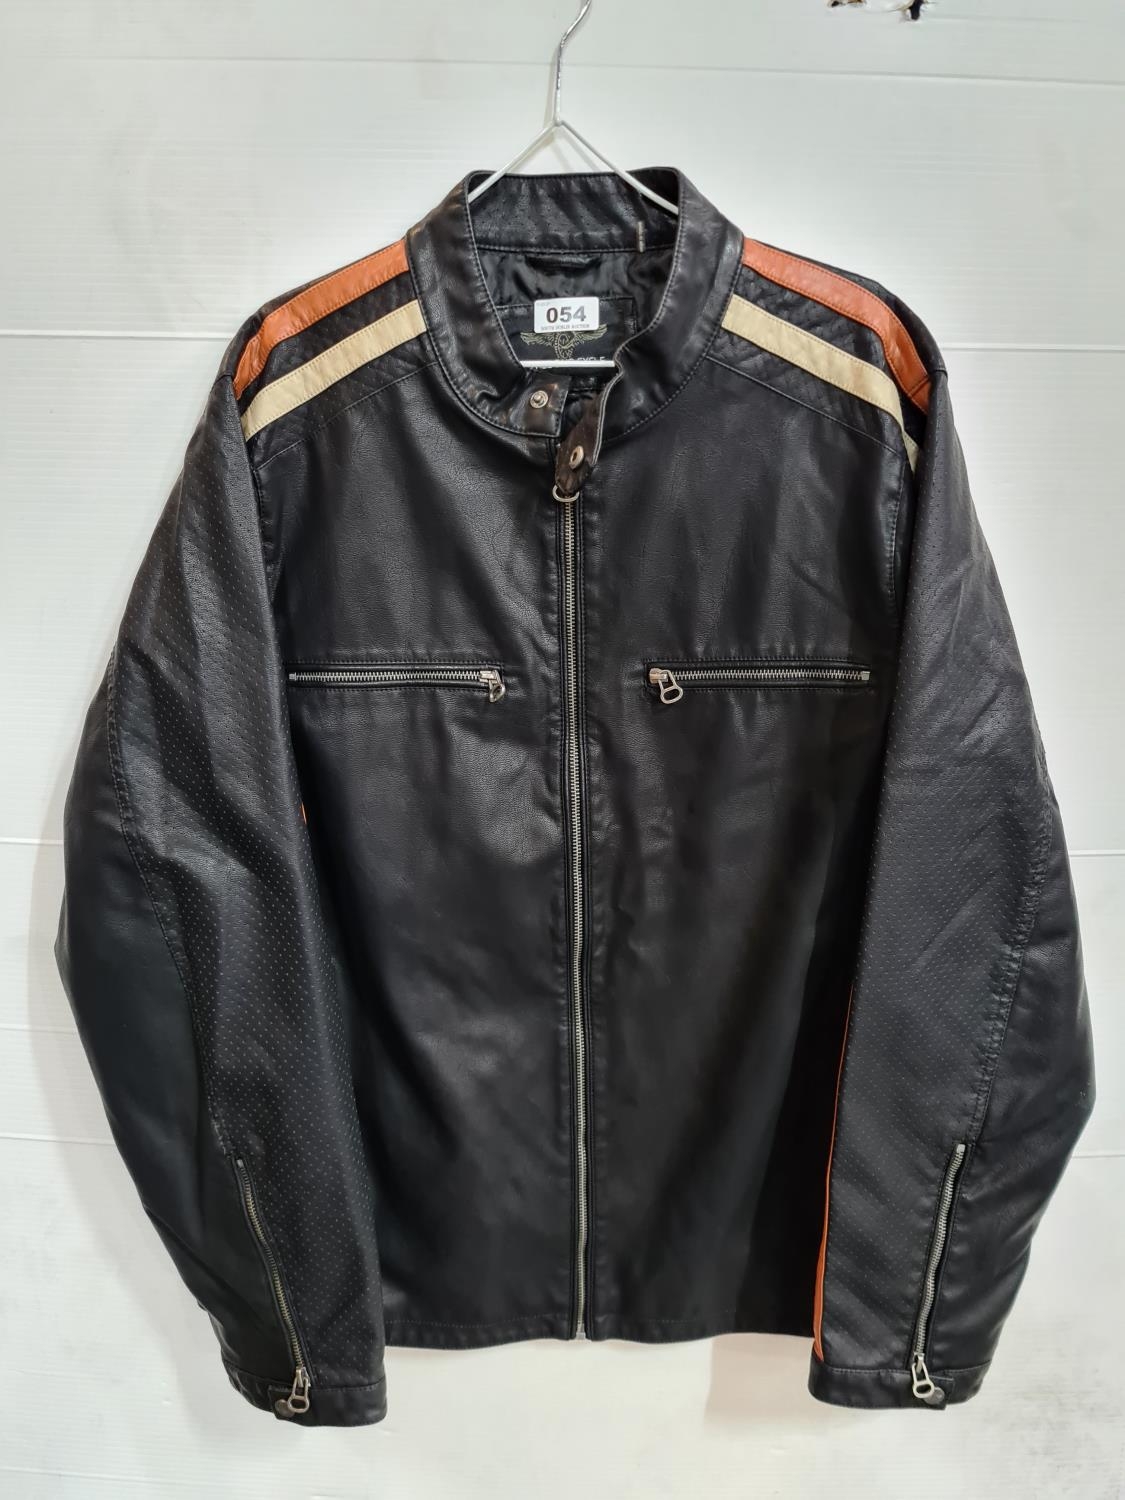 Gents Wilsons cycle leather jacket Size XL VGC